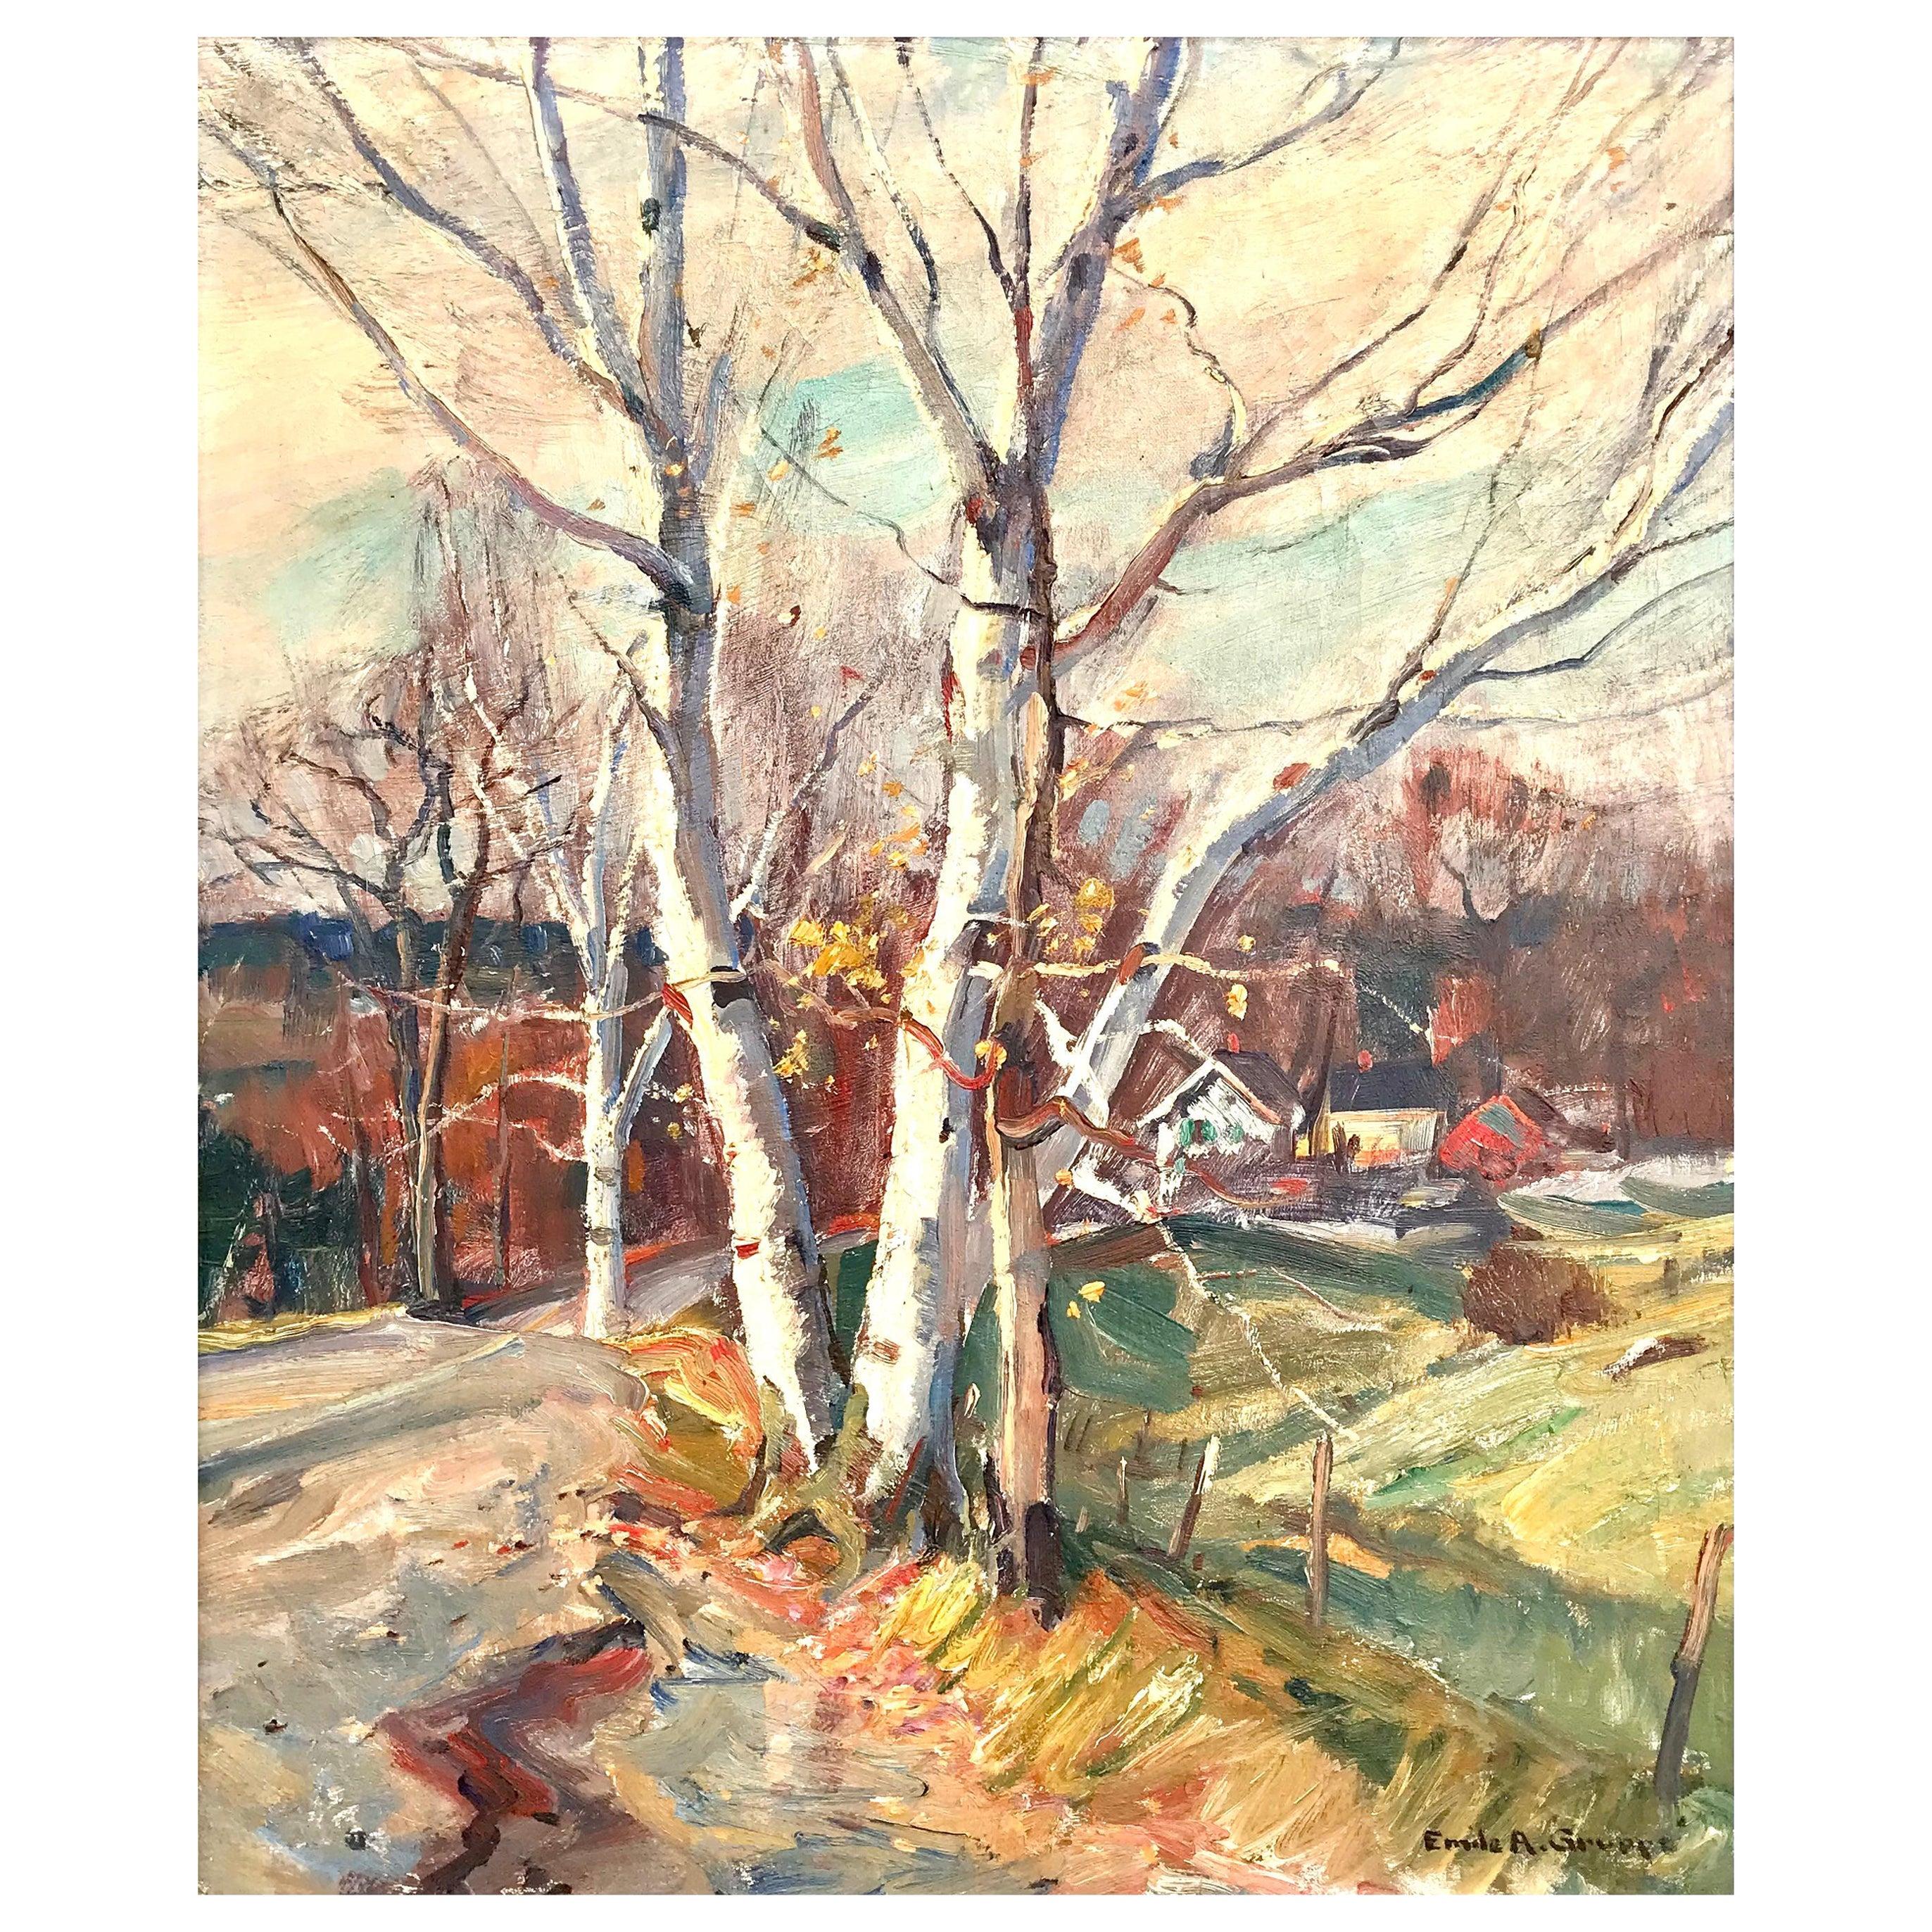 Emile Albert Gruppe Birches Along The Road
Signed:. l.r. Emile A. Gruppe; also signed and titled on stretcher
Oil On Canvas
Dimensions: 30 by 25 inches
Framed 34.5 by 29.5 inches

Another signature Massachusetts or Vermont birth painting during the